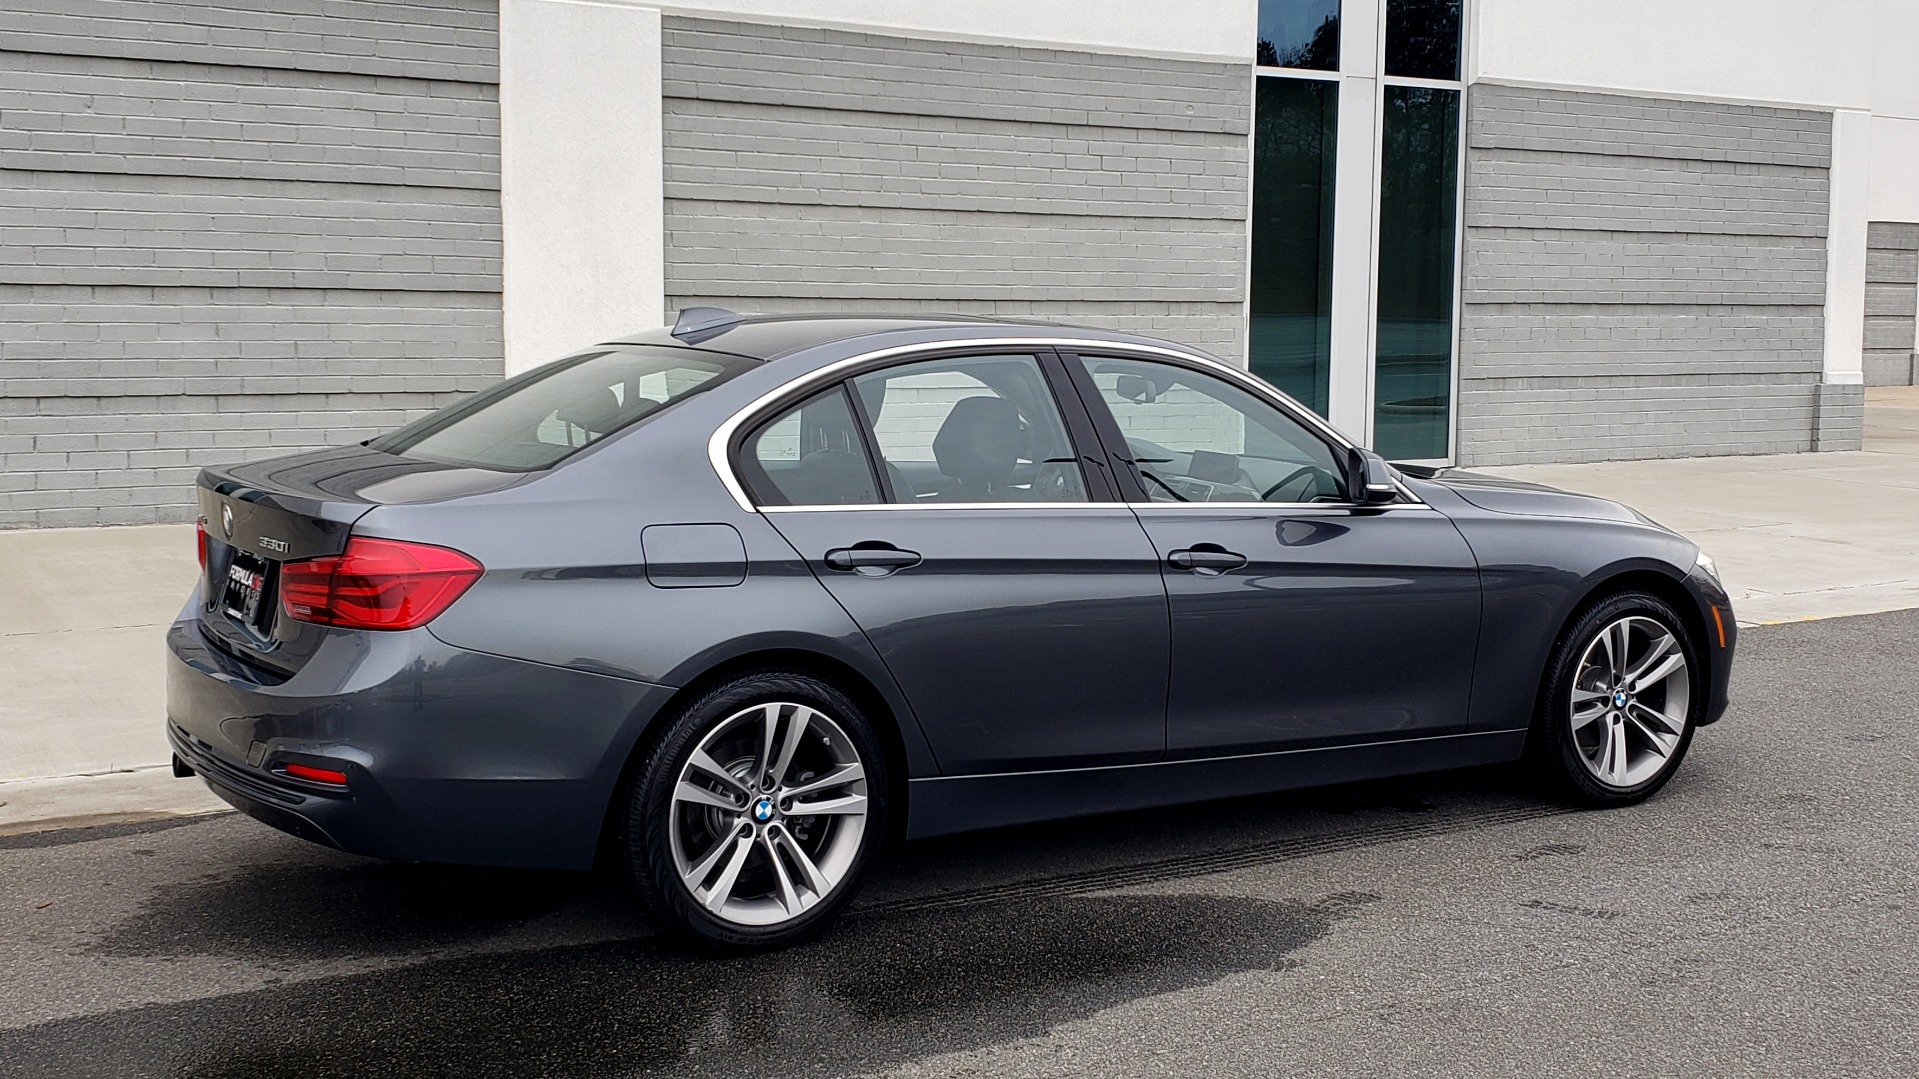 Used 2018 BMW 3 SERIES 330I XDRIVE PREMIUM / CONV PKG NAV / BLIND SPOT / HTD STS / REARVIEW for sale Sold at Formula Imports in Charlotte NC 28227 3